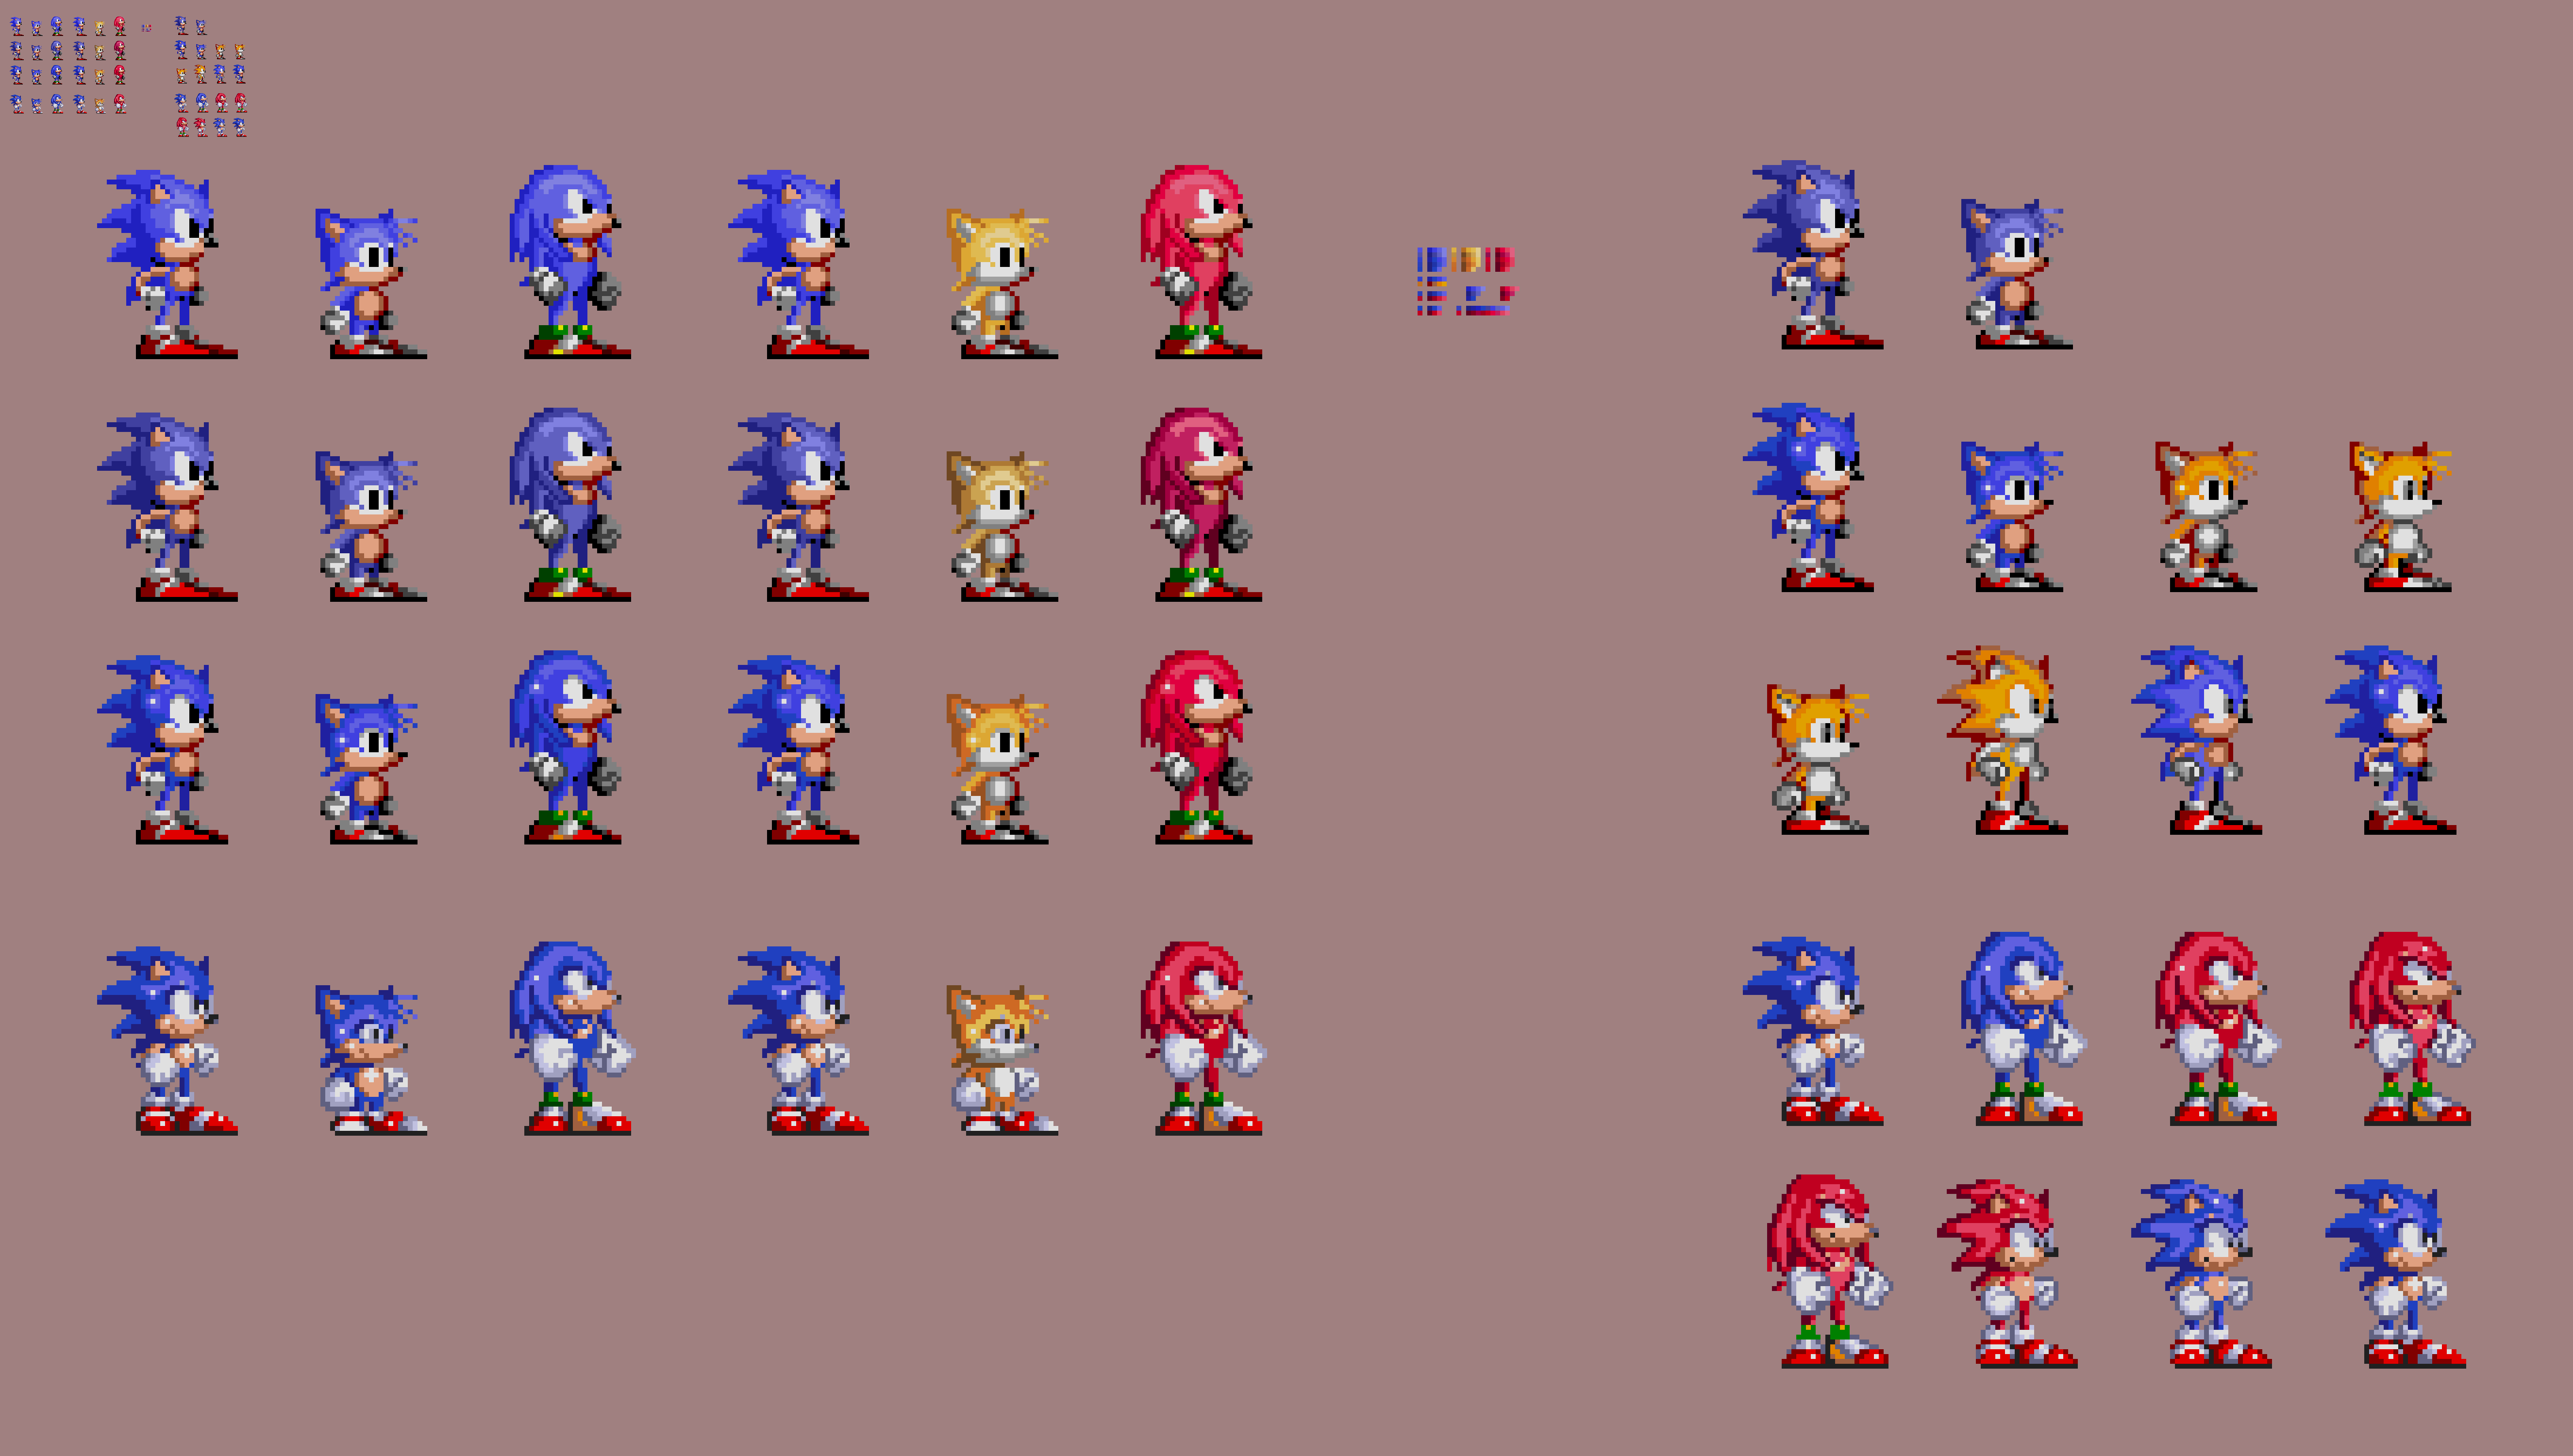 Angie's Sonic sprites/edits (UPDATE for 1.5) [Sonic the Hedgehog Forever]  [Mods]